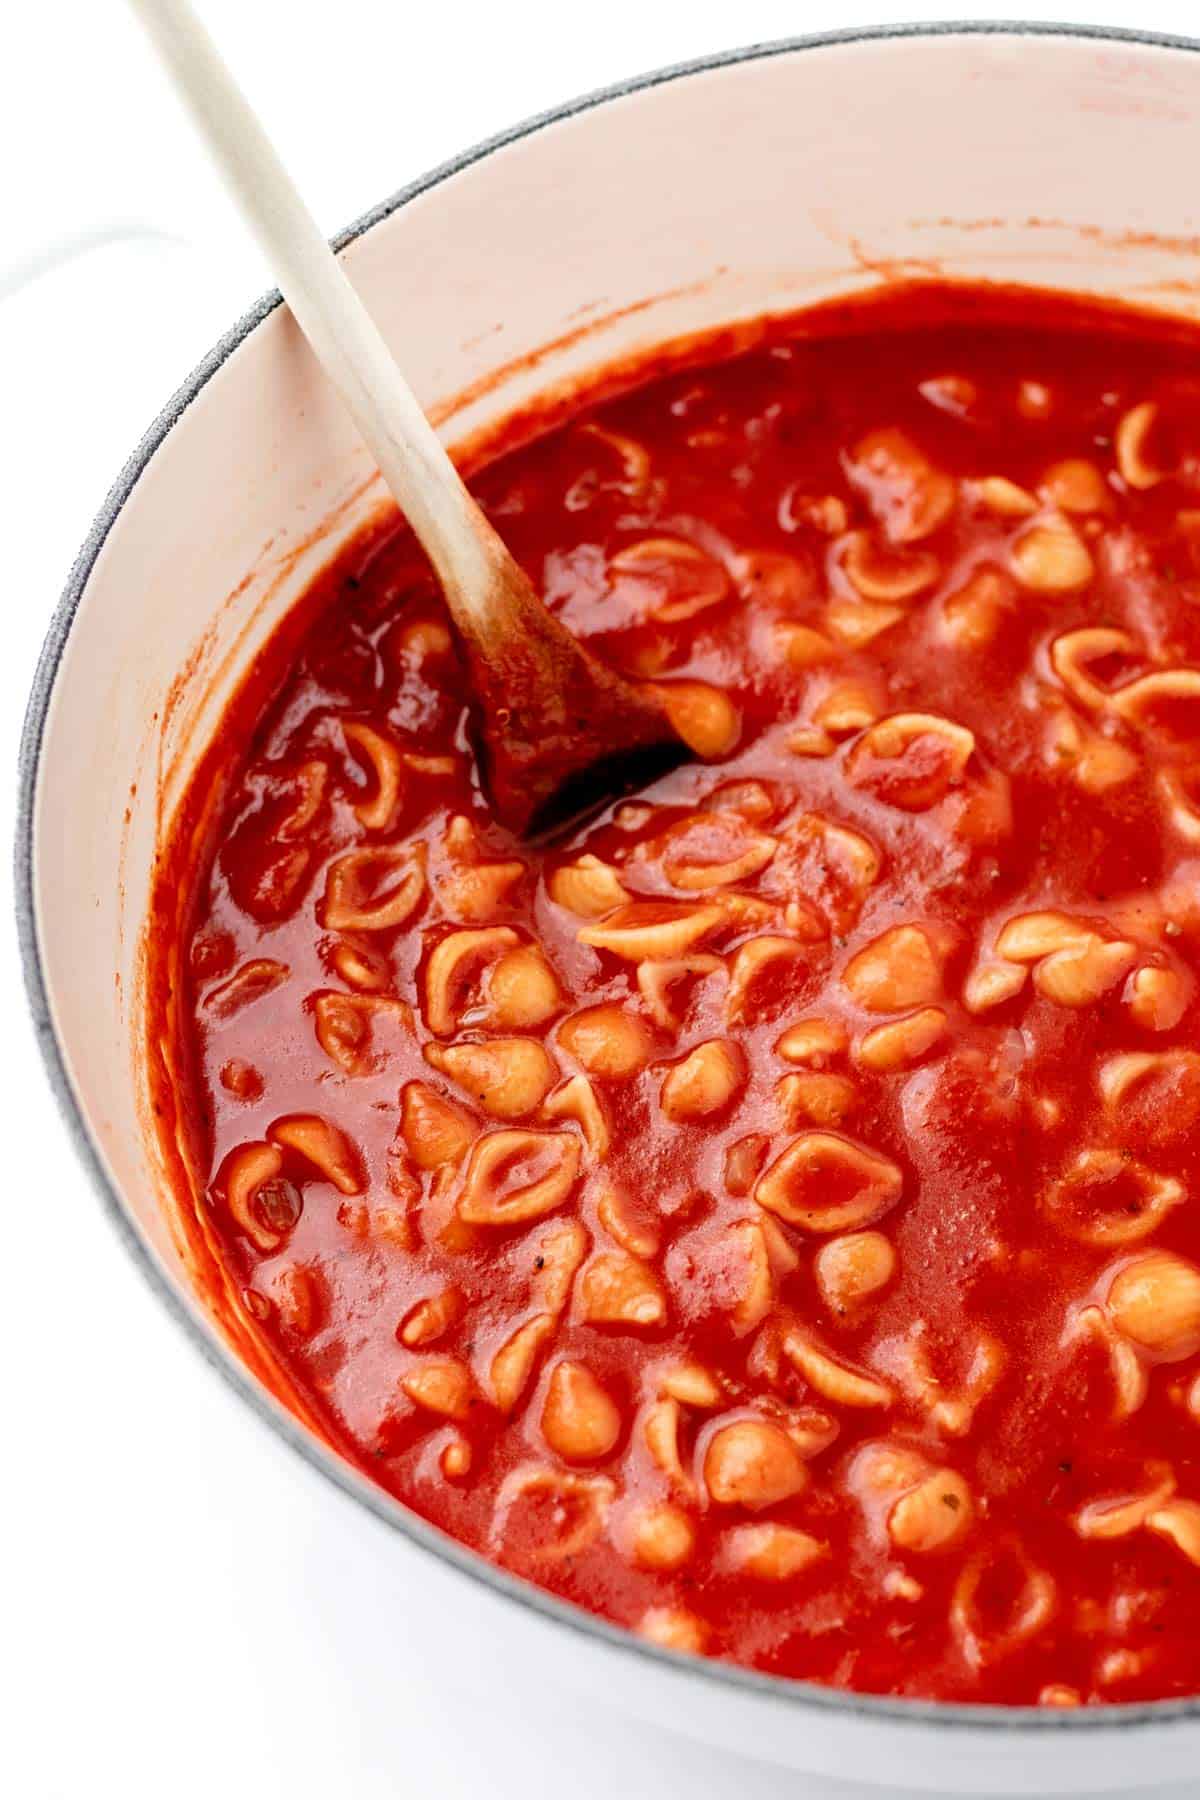 A close up image of a large pot full of noodles and red sauce with a spoon.